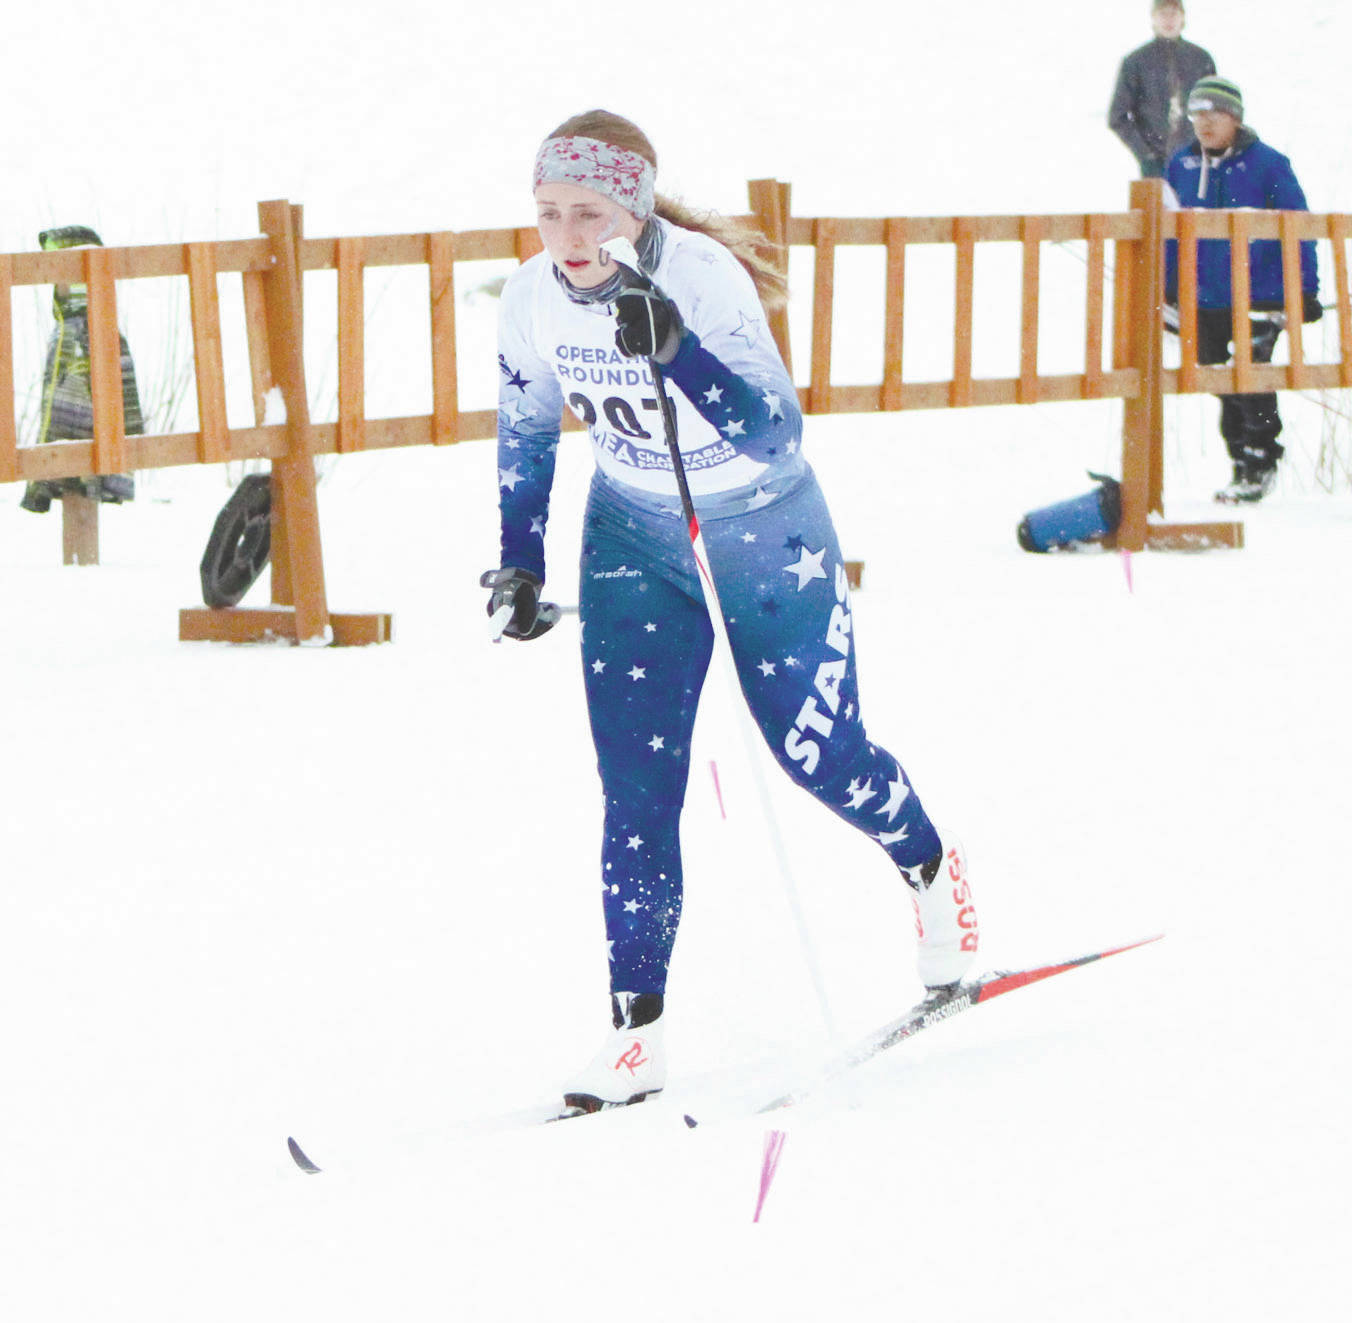 Soldotna’s Katie Delker competes in the Region III Championships Saturday, Feb. 8, 2020, at Government Peak Recreation area near Palmer. (Photo by Tim Rockey/Frontiersman)